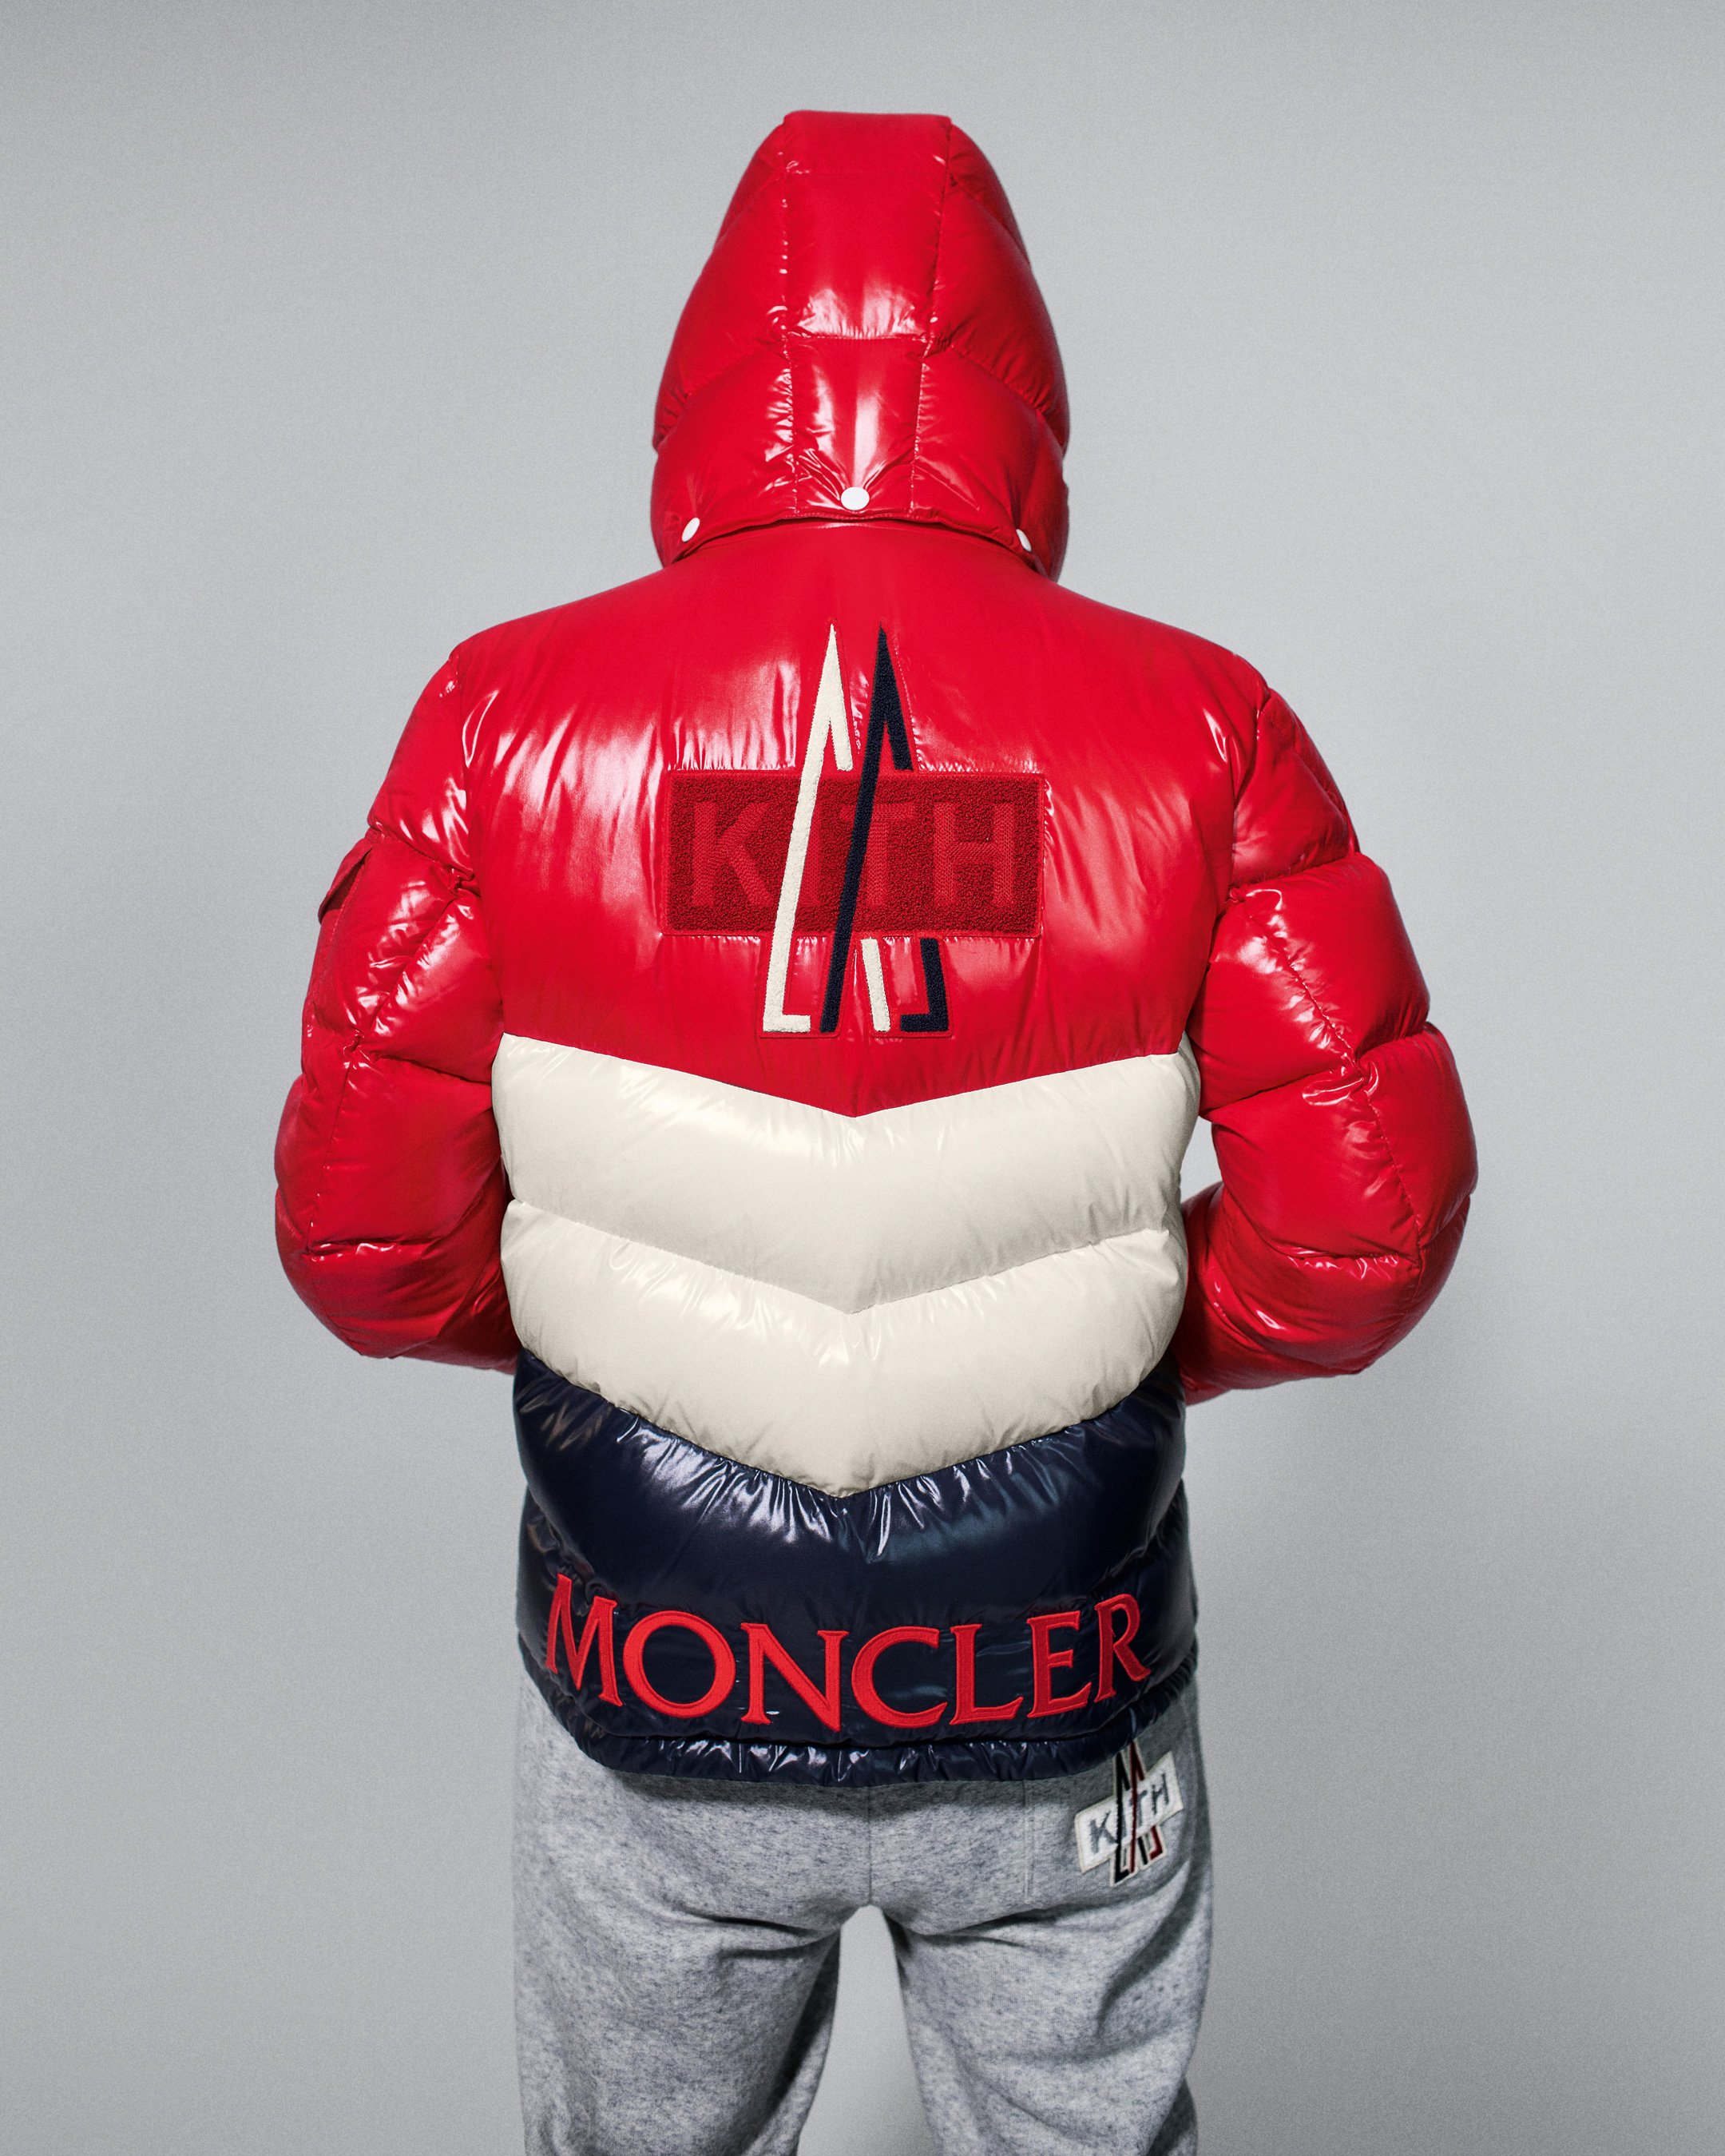 Moncler, Asics, and Kith Link for Winter Footwear and Apparel 